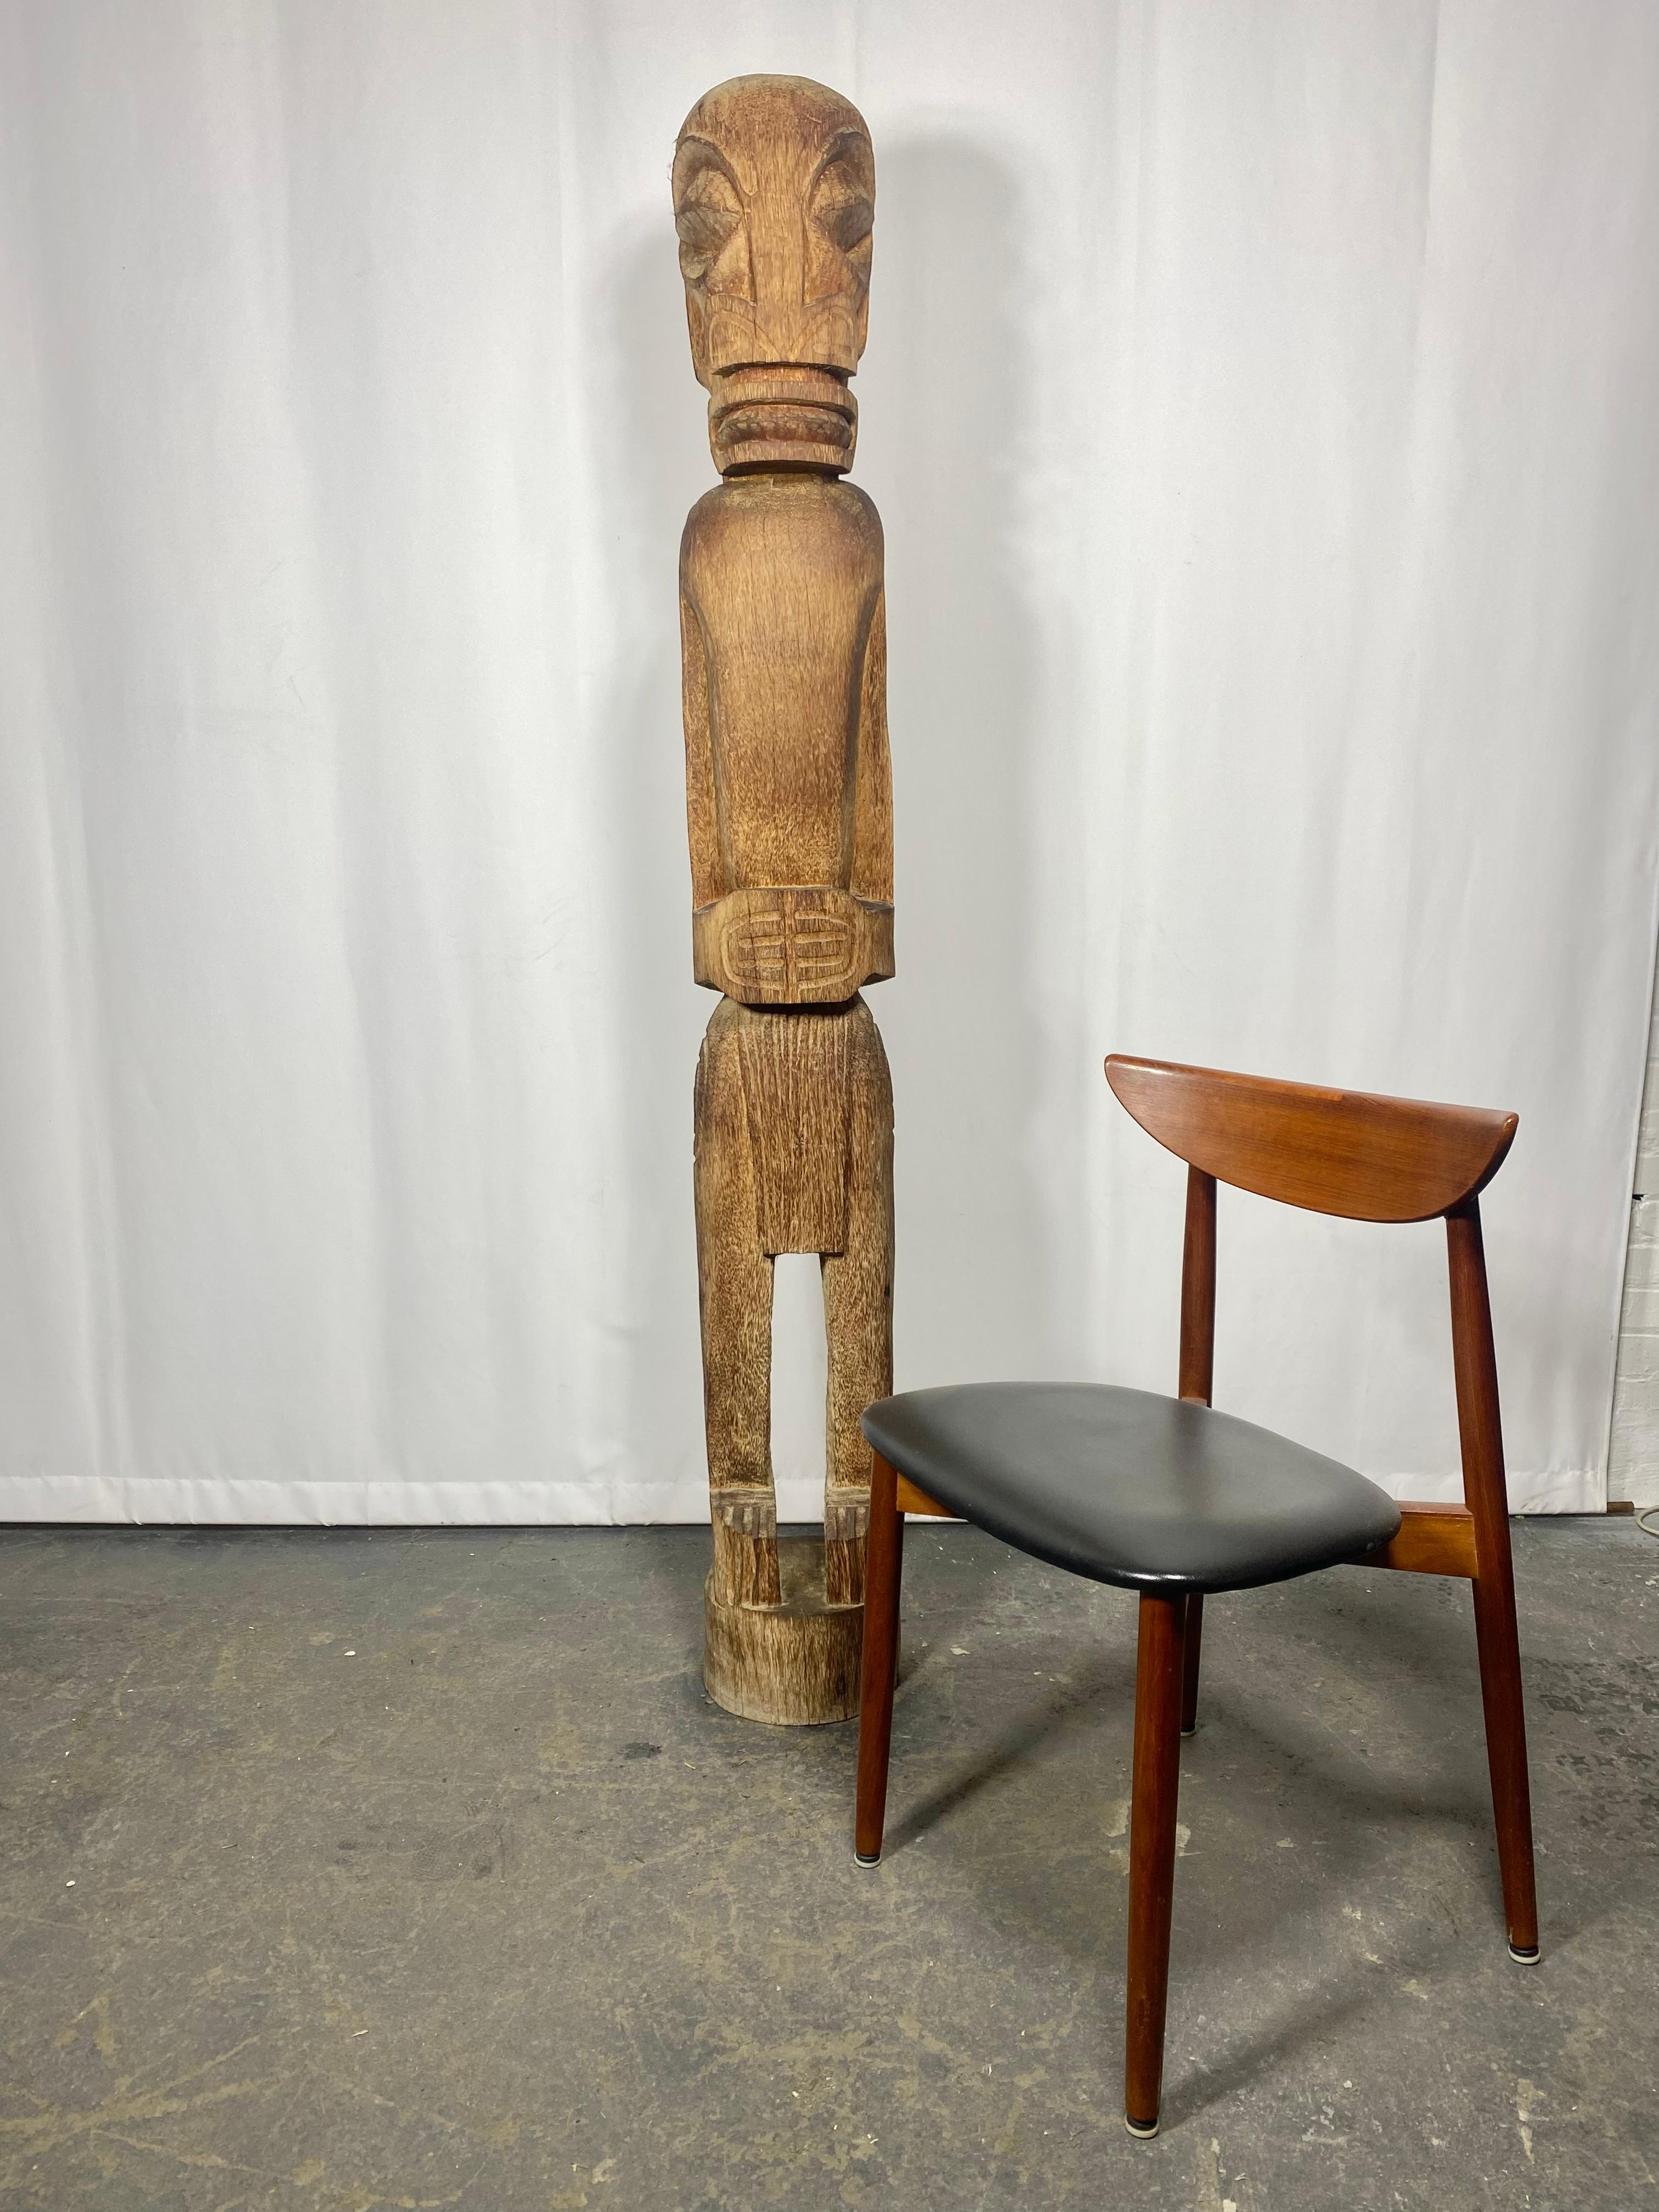 Vintage Monumental Carved Wood Tiki Sculpture. French Polynesia.Tahiti. Wonderfully carved, Strong presence. Carved signed Creation Sanobo,, (see photo). Hand delivery avail to New York City or anywhere en route from Buffalo NY 